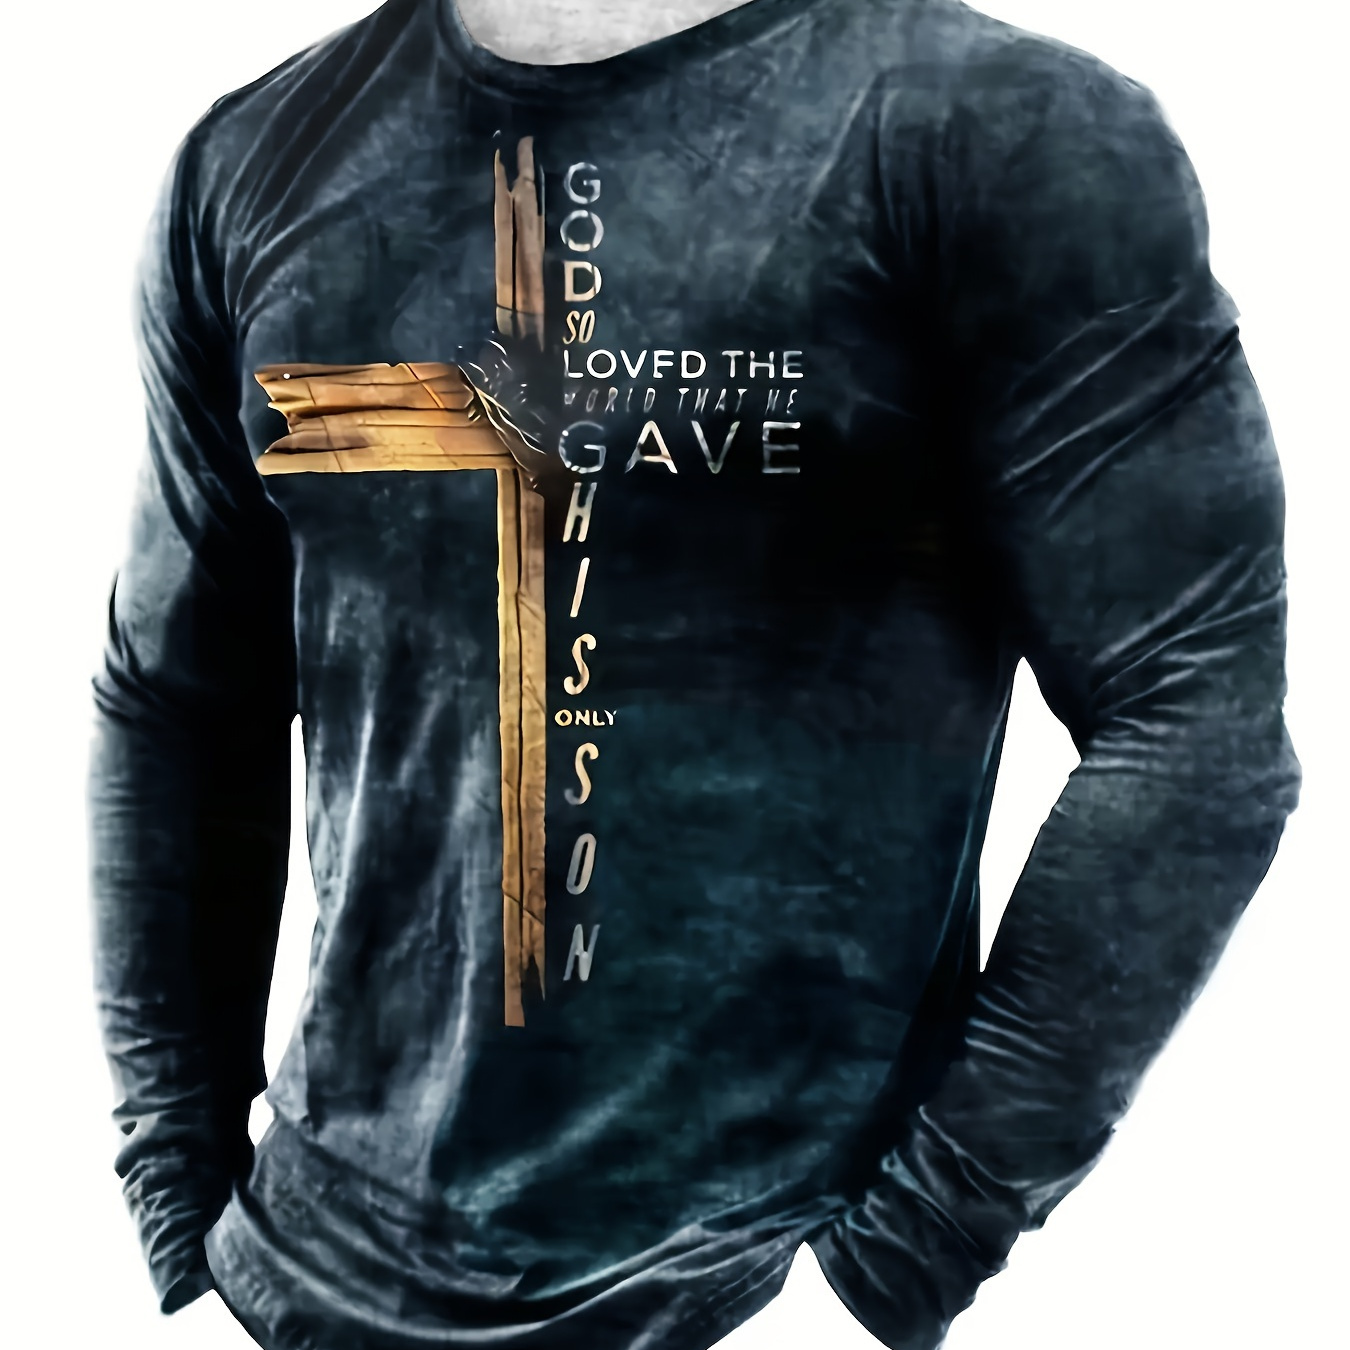 

Classic Cross And Letter Print Men's Creative Long Sleeve Crew Neck T-shirt For Spring Fall, Gift For Men